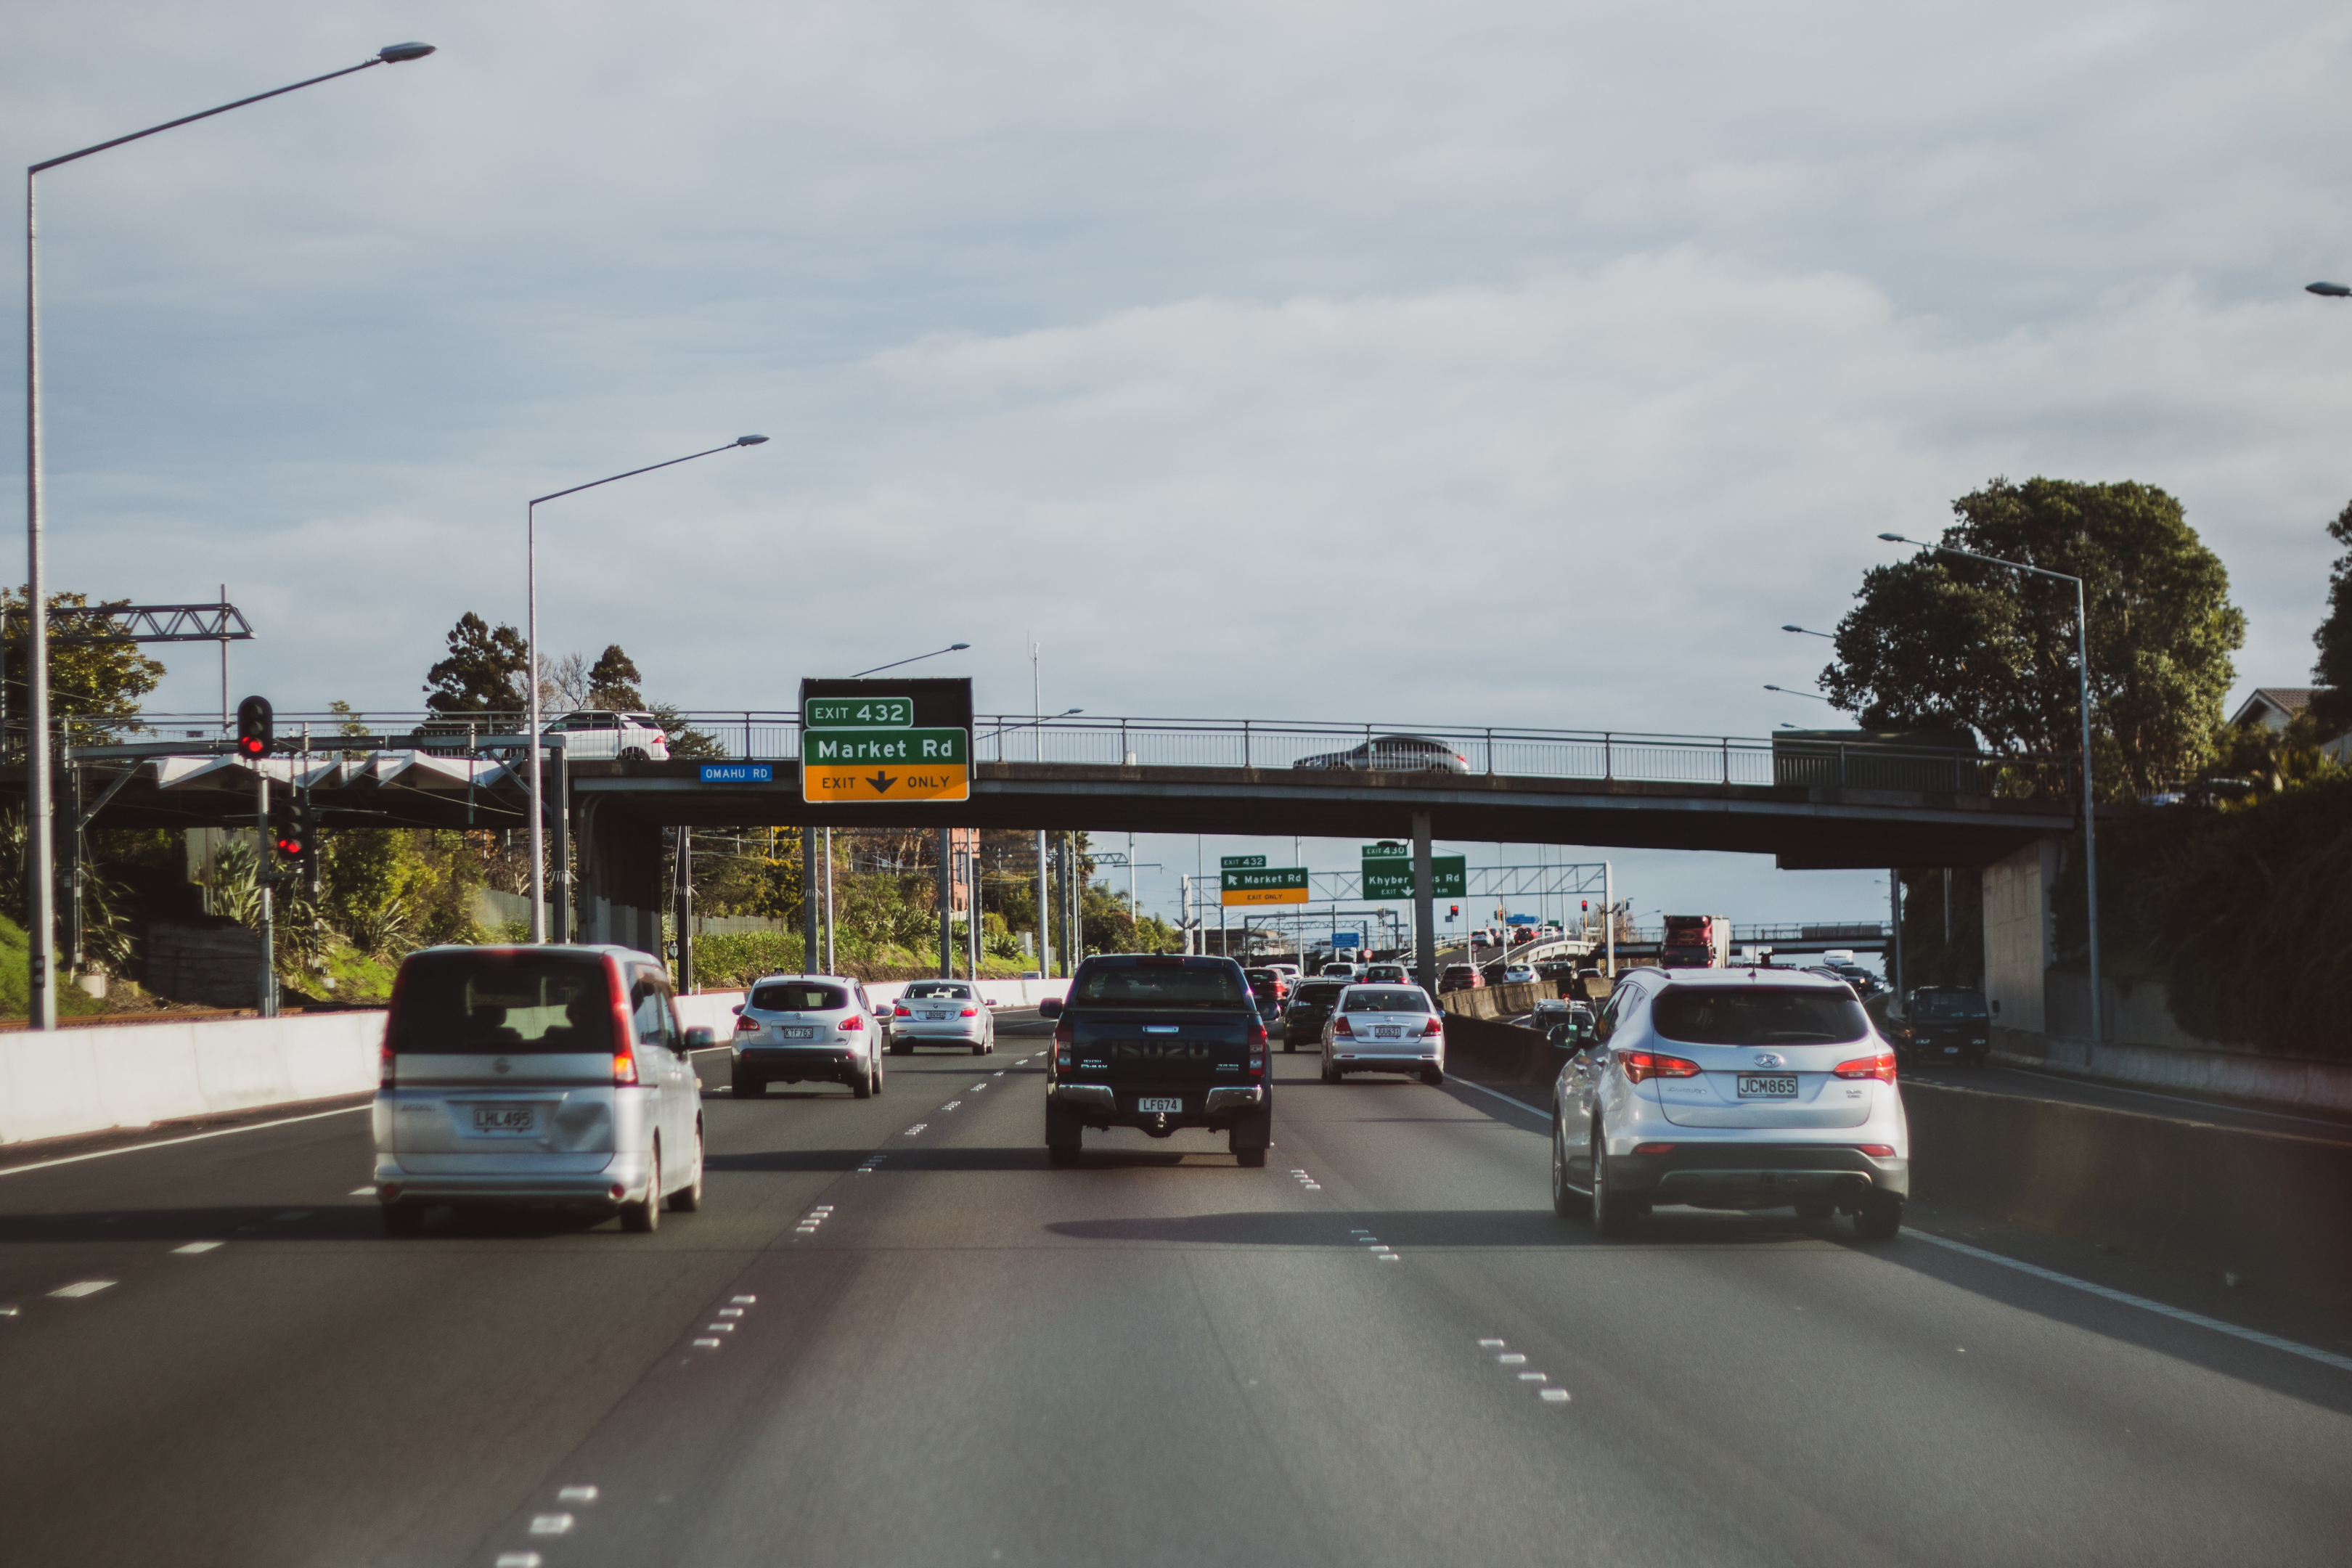 As traffic jams progress now that there's an ease in community quarantines, a new number coding scheme is being proposed by authorities to reduce traffic jams. | Photo from Unsplash